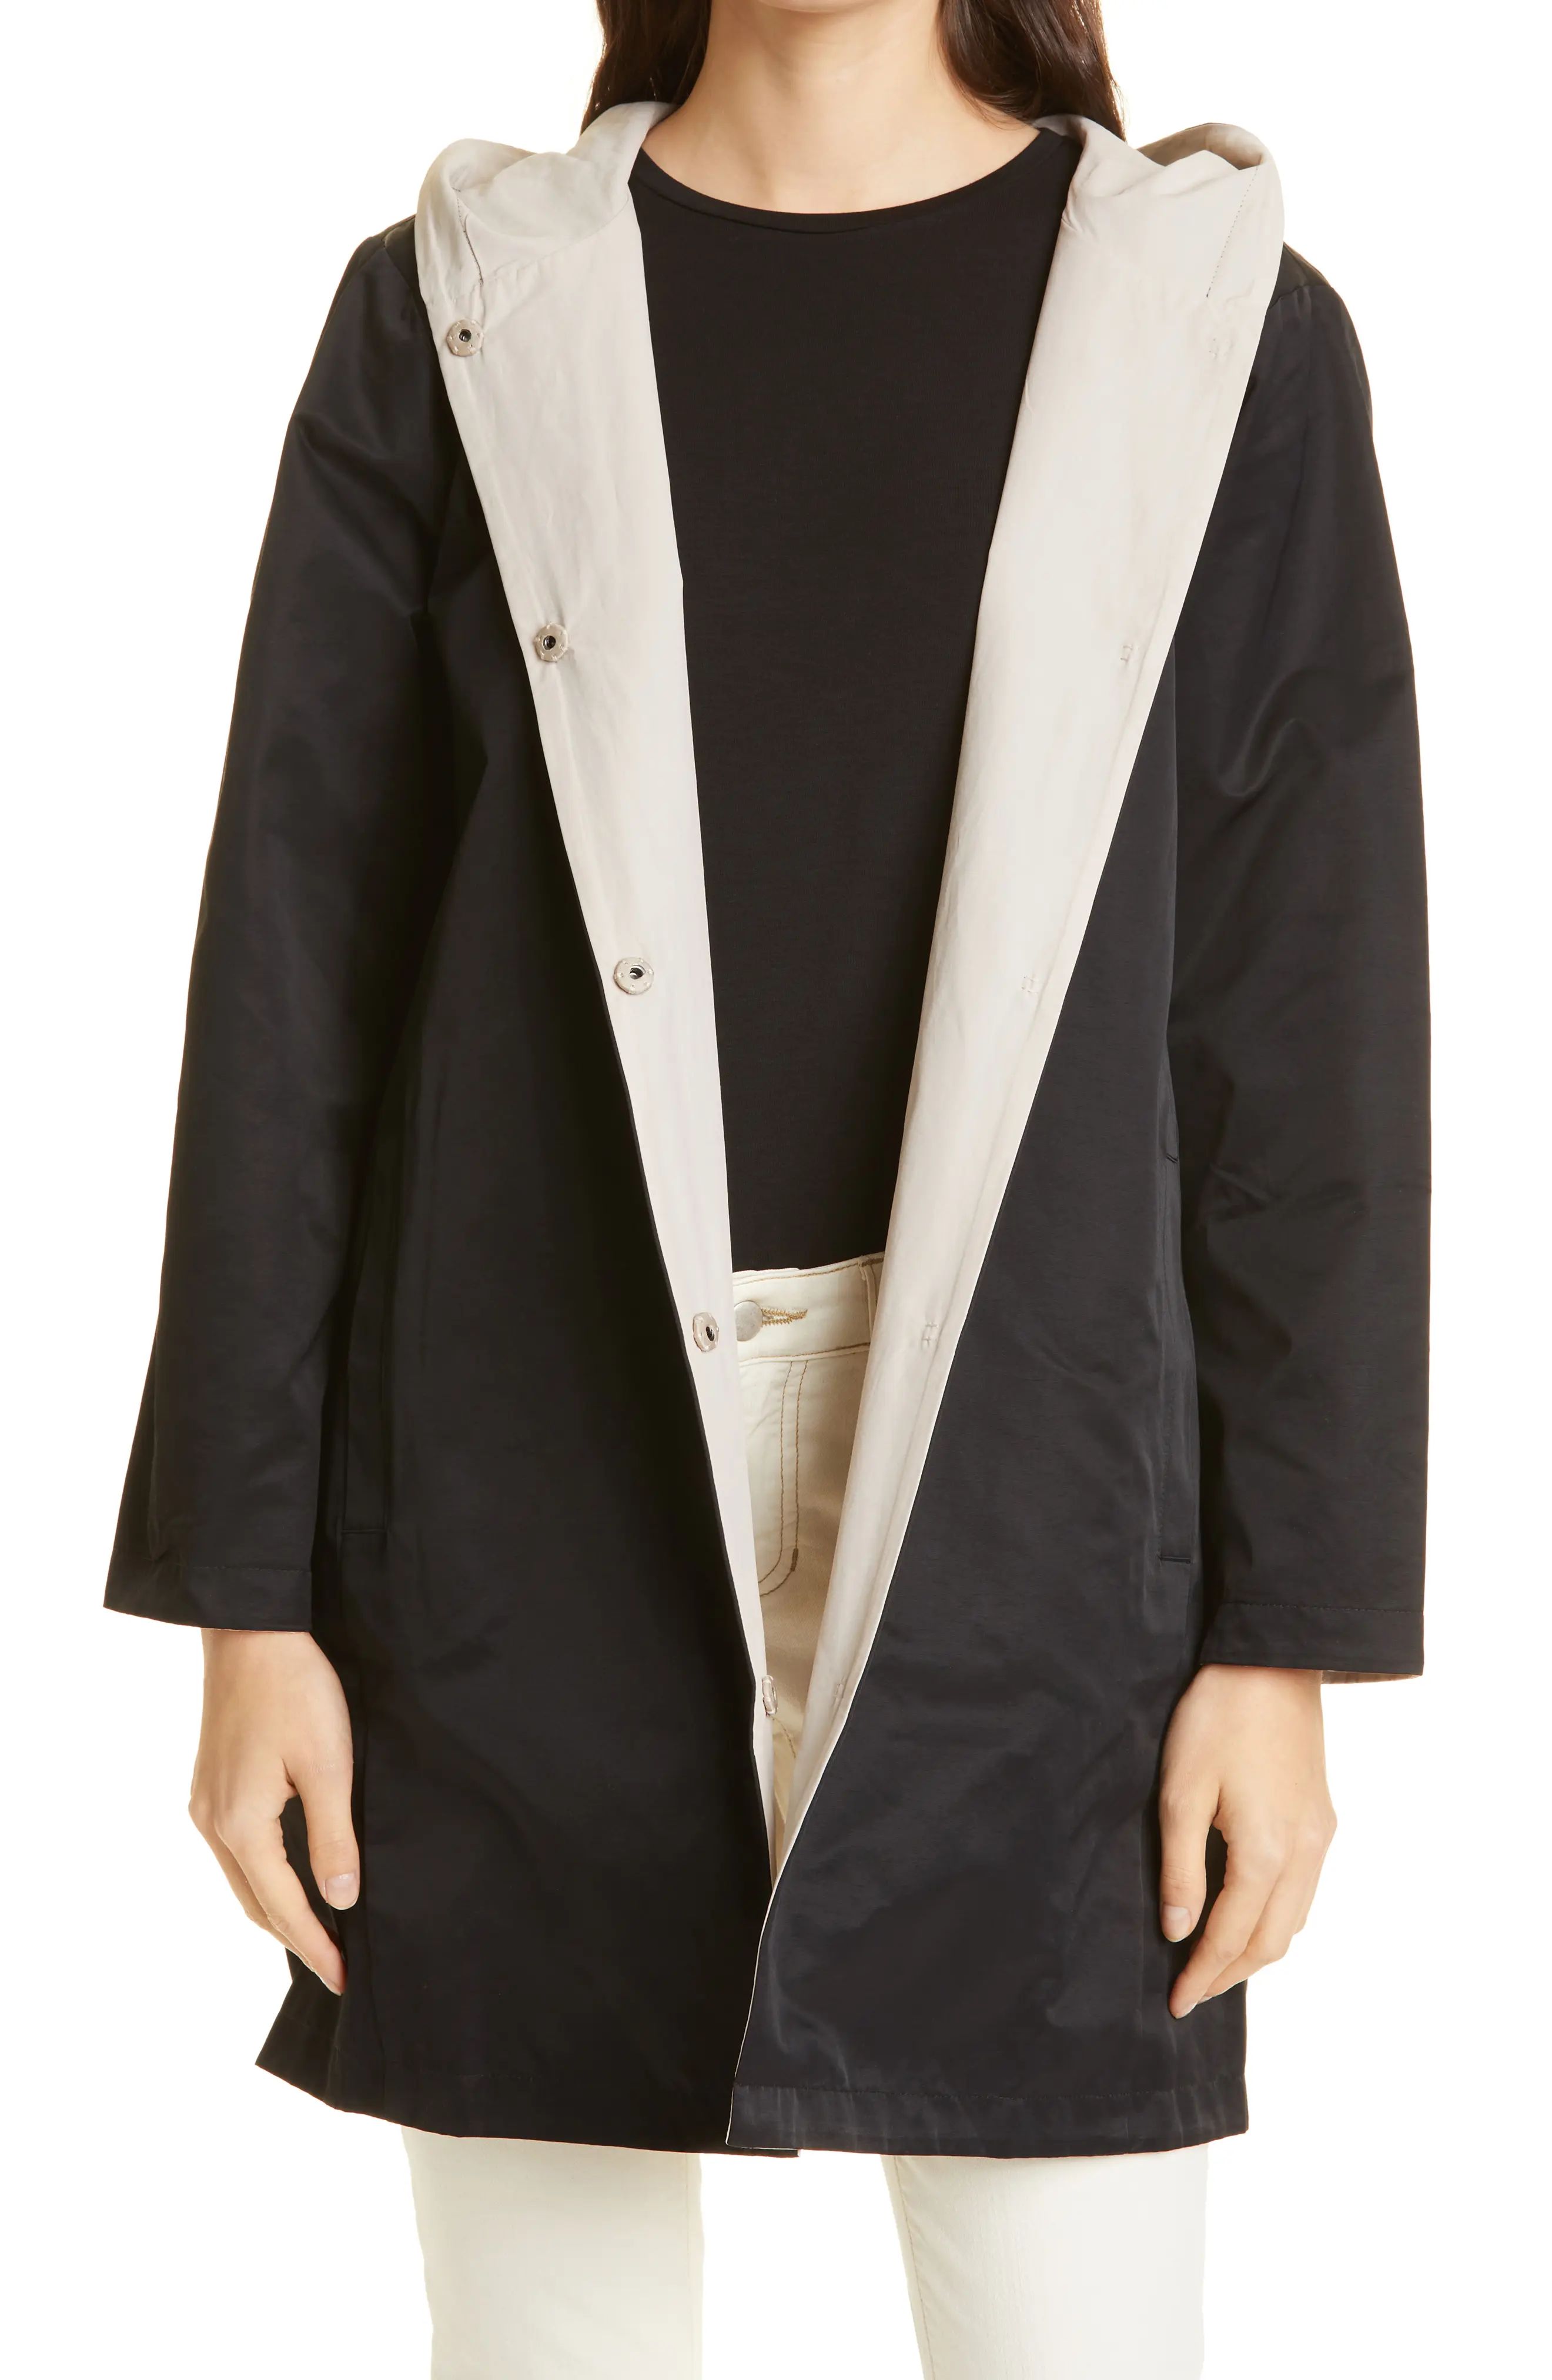 Eileen Fisher Reversible Hooded Jacket in Black at Nordstrom, Size X-Large | Nordstrom